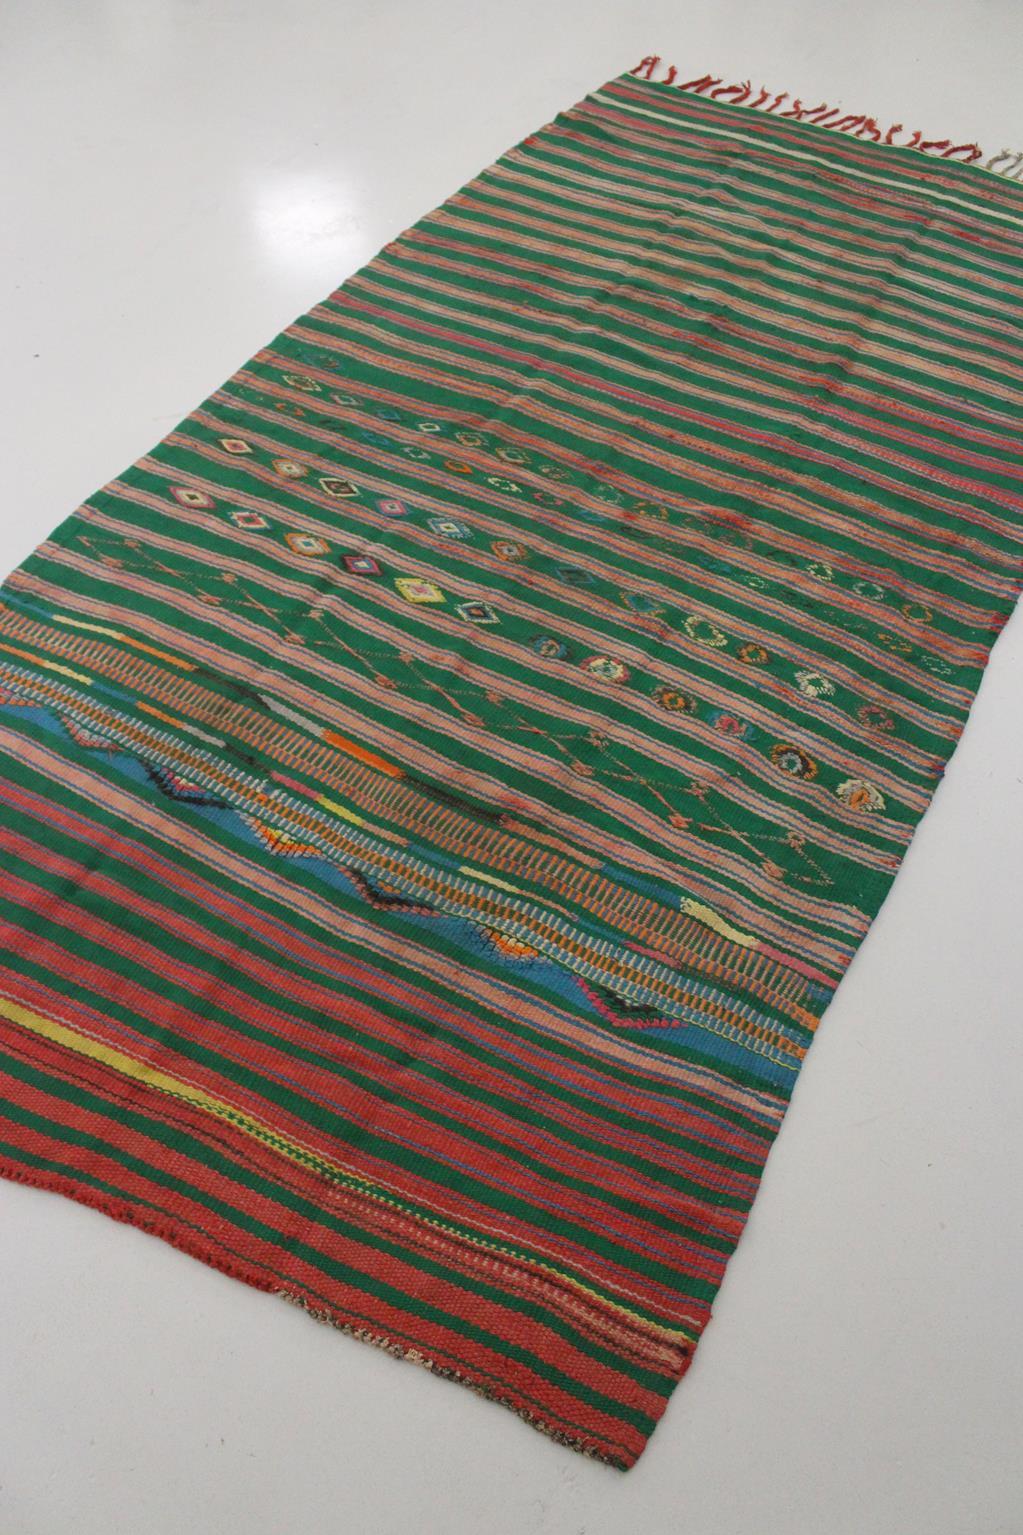 Vintage Moroccan striped kilim rug - Green/pink/red - 5.1x10.2feet / 157x312cm For Sale 4